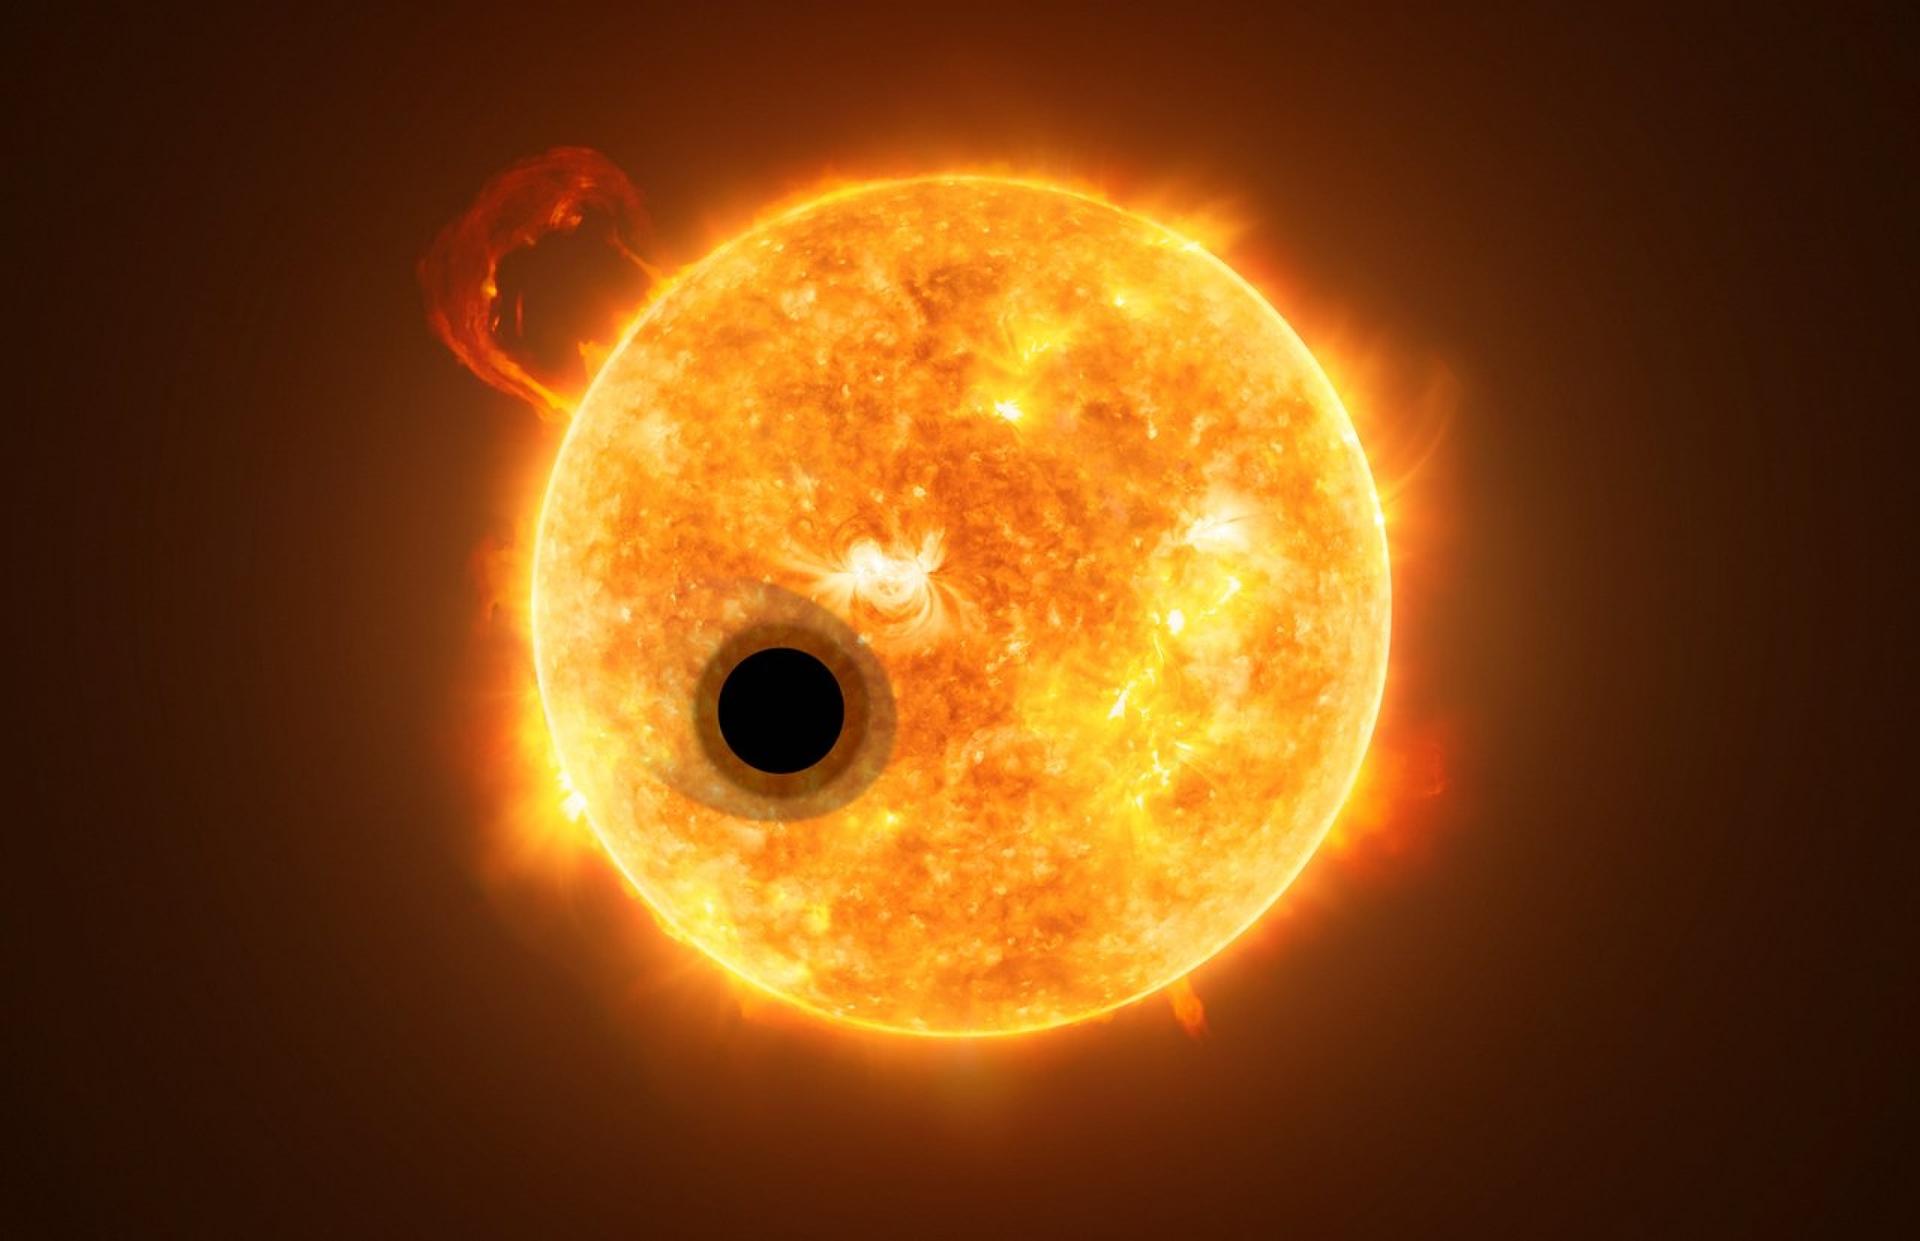 Exoplanet WASP-107b is a gas giant, orbiting a highly active K-type main sequence star. The star is about 200 light-years from Earth.